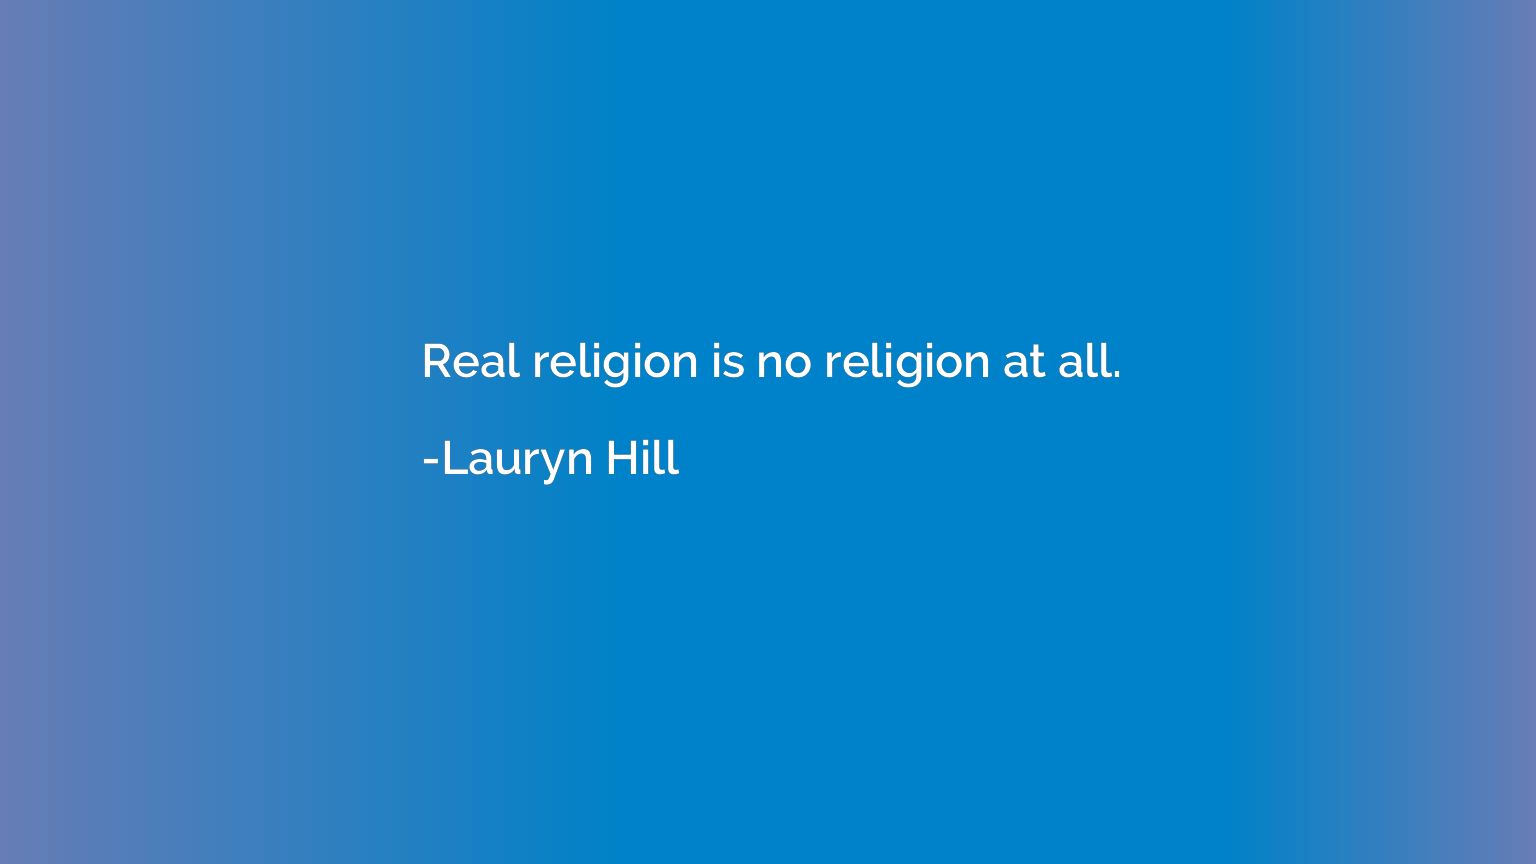 Real religion is no religion at all.